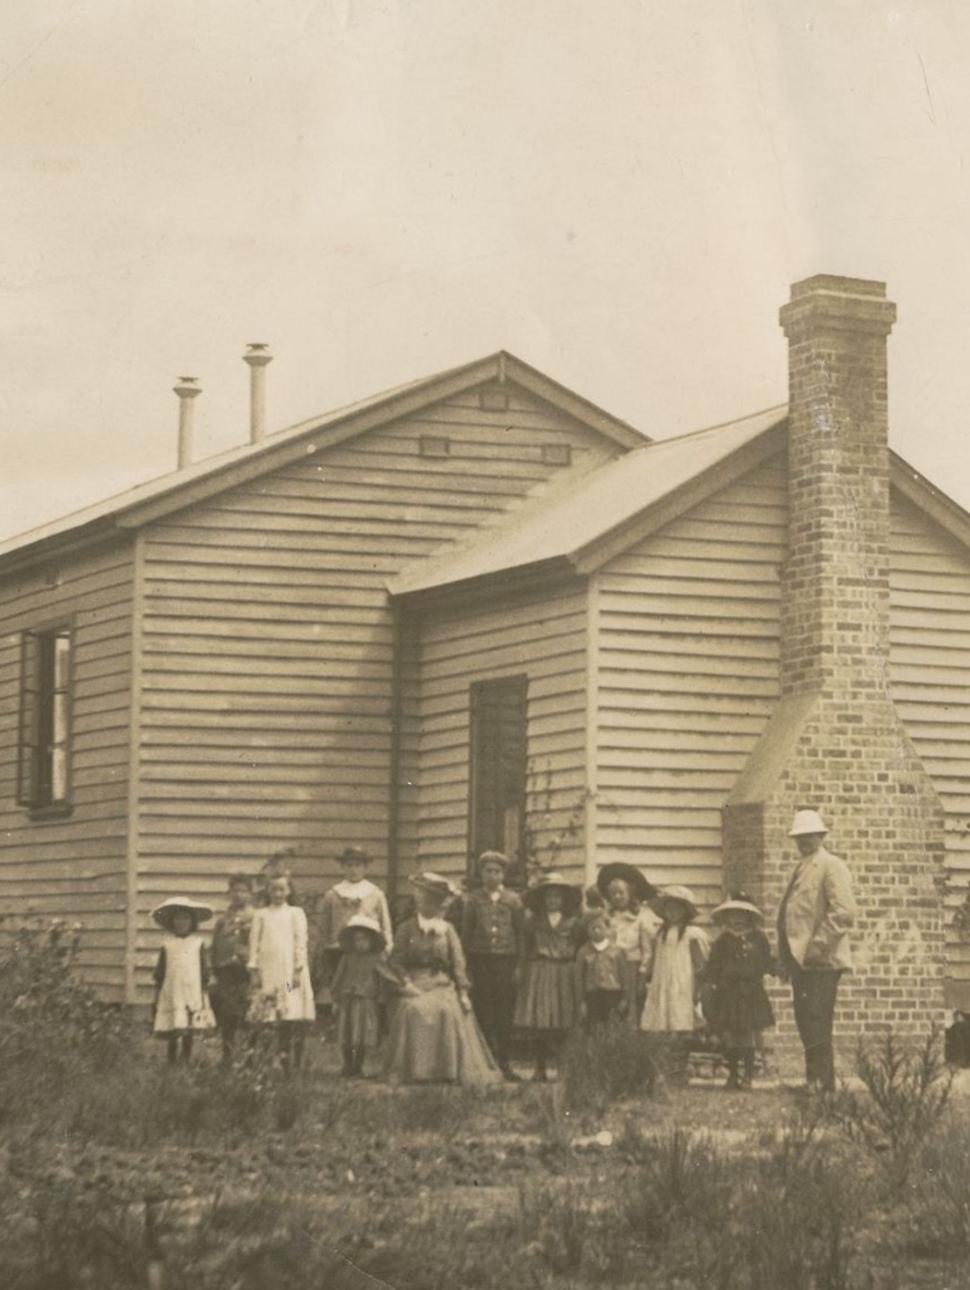 a historic sepia photograph of an old building hall with a group of people adults and children gathered in front of the building